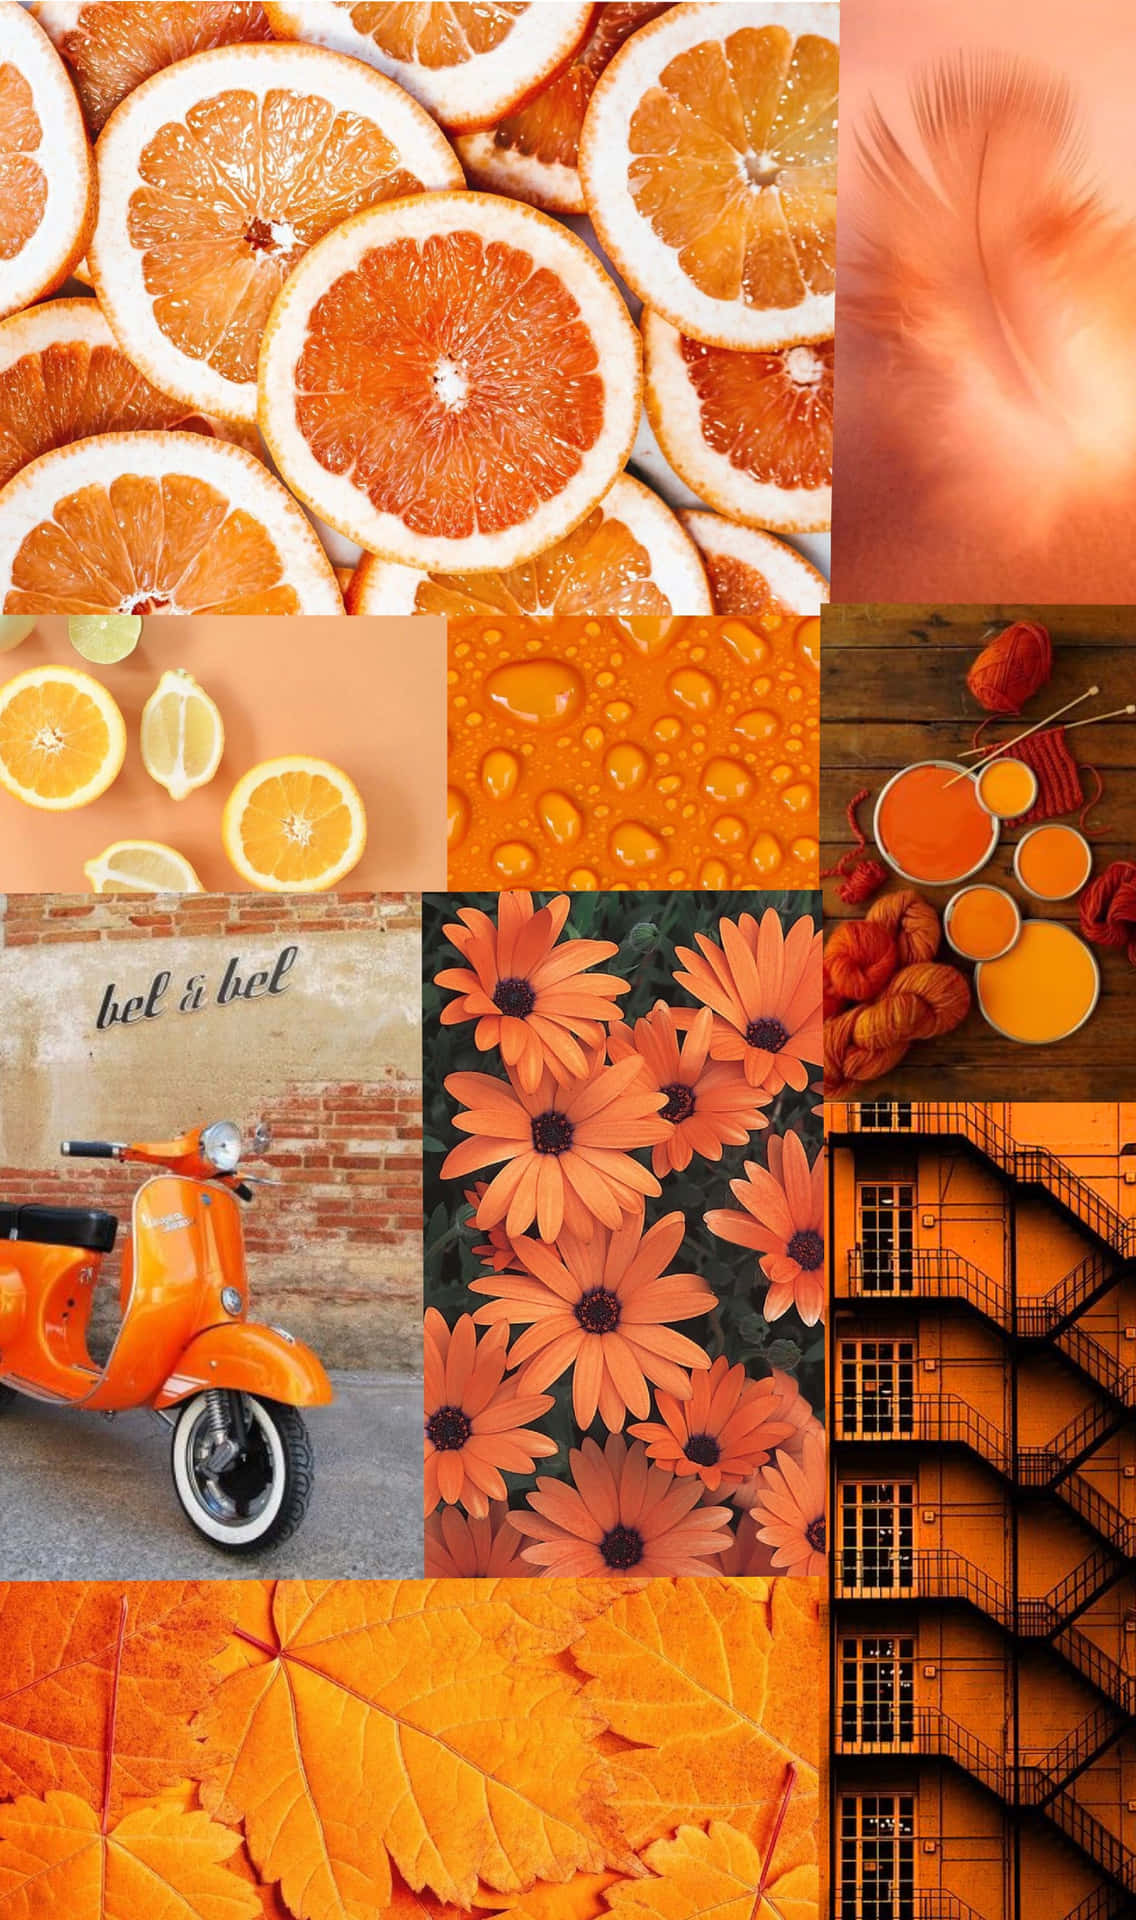 Download Brighten up the day with an Orange Aesthetic | Wallpapers.com